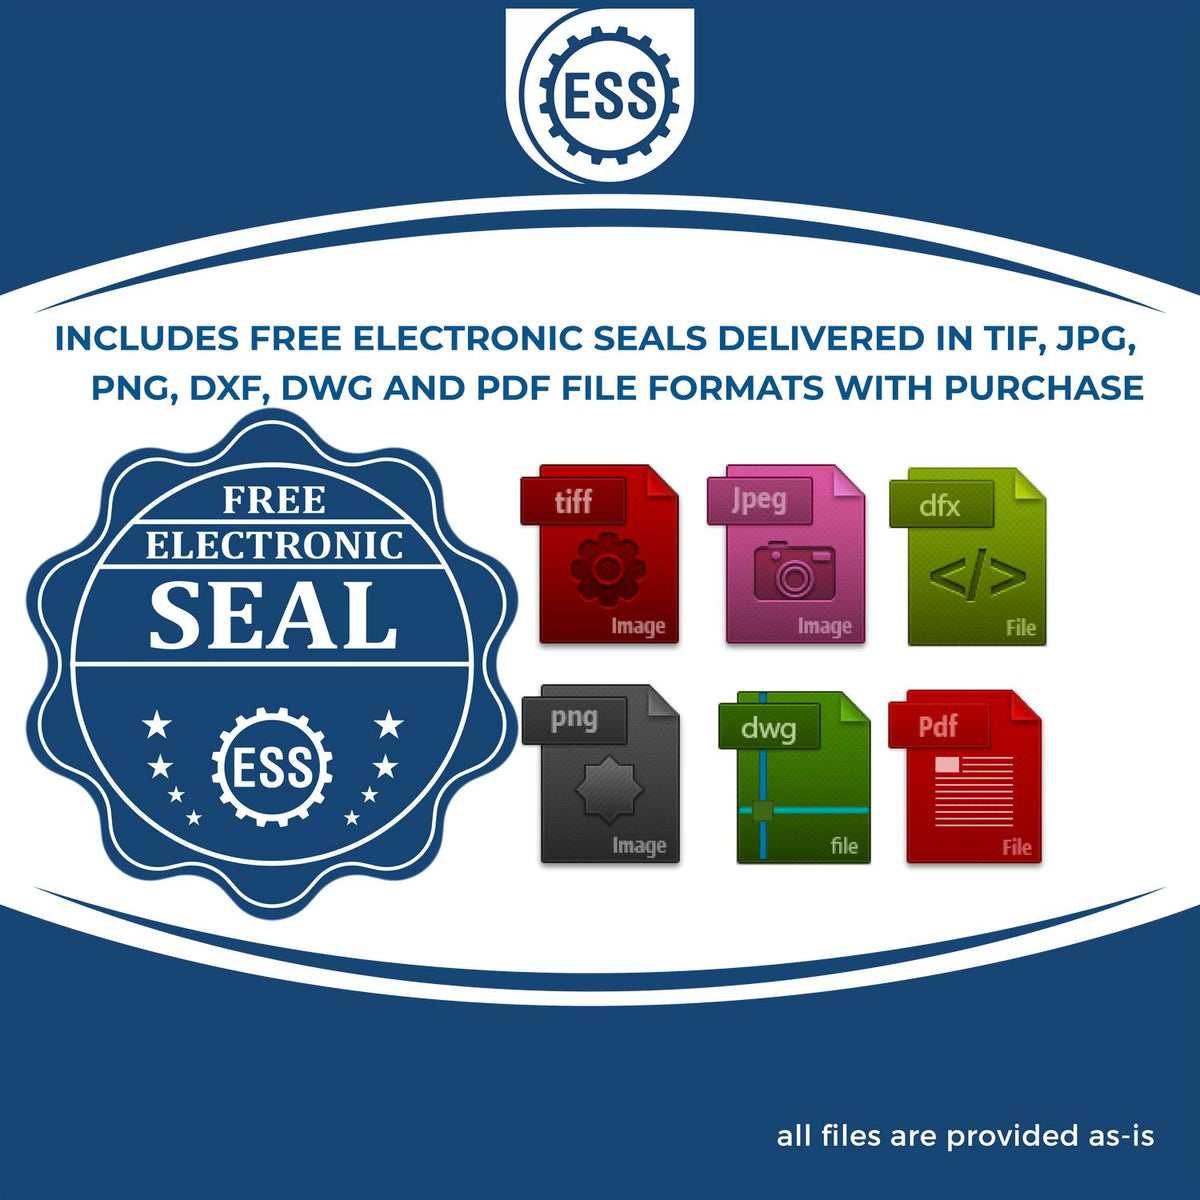 An infographic for the free electronic seal for the Self-Inking Arkansas Landscape Architect Stamp illustrating the different file type icons such as DXF, DWG, TIF, JPG and PNG.